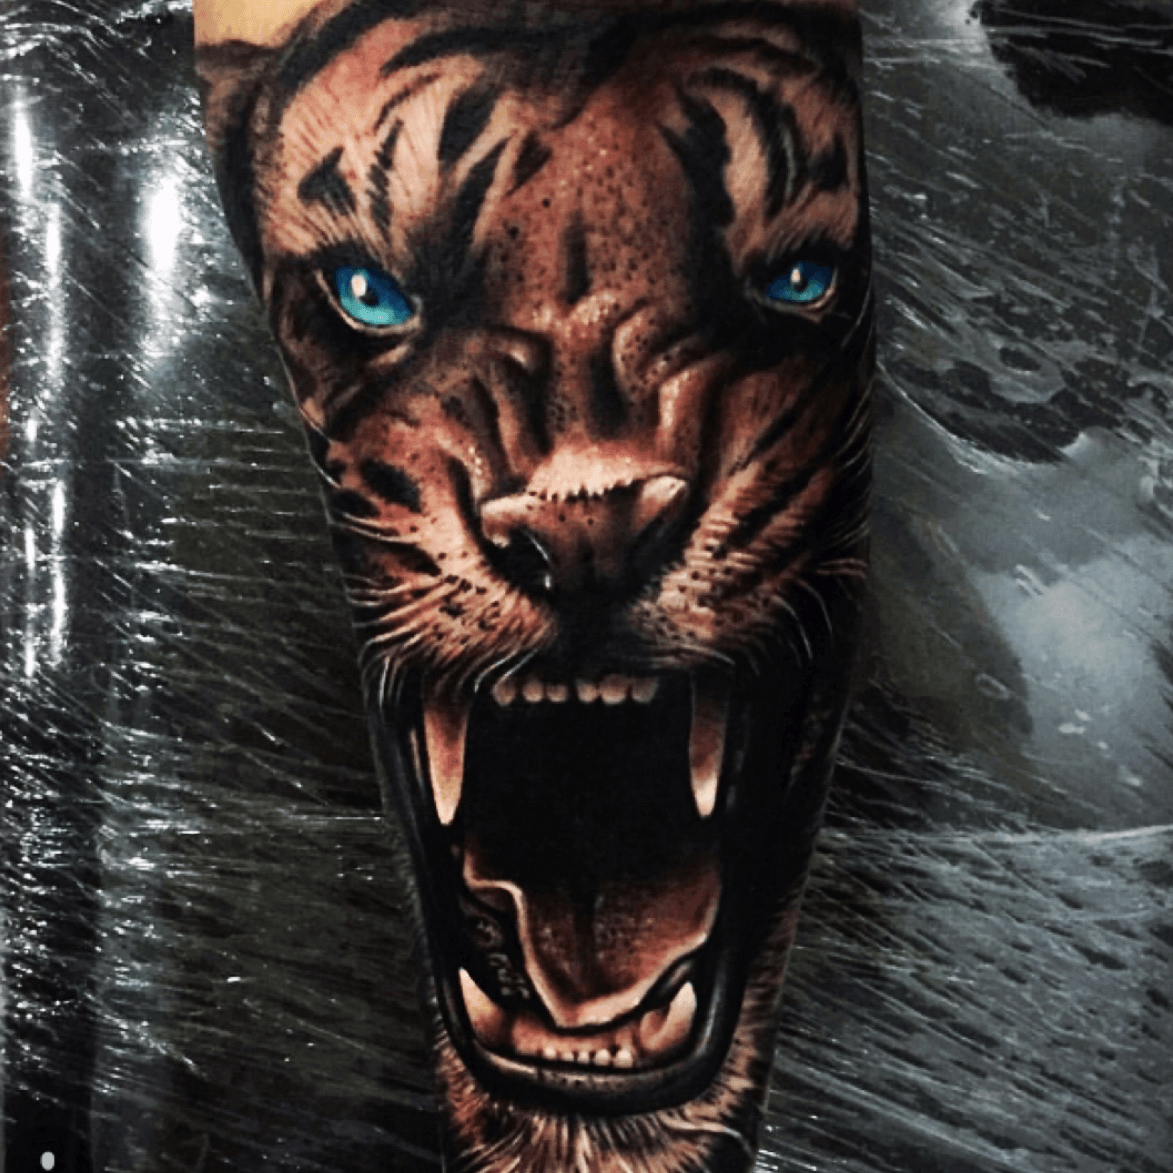 Head of roaring tiger in tongues of flame angry wild big cat front view  tribal tattoo style vector illustration  CanStock